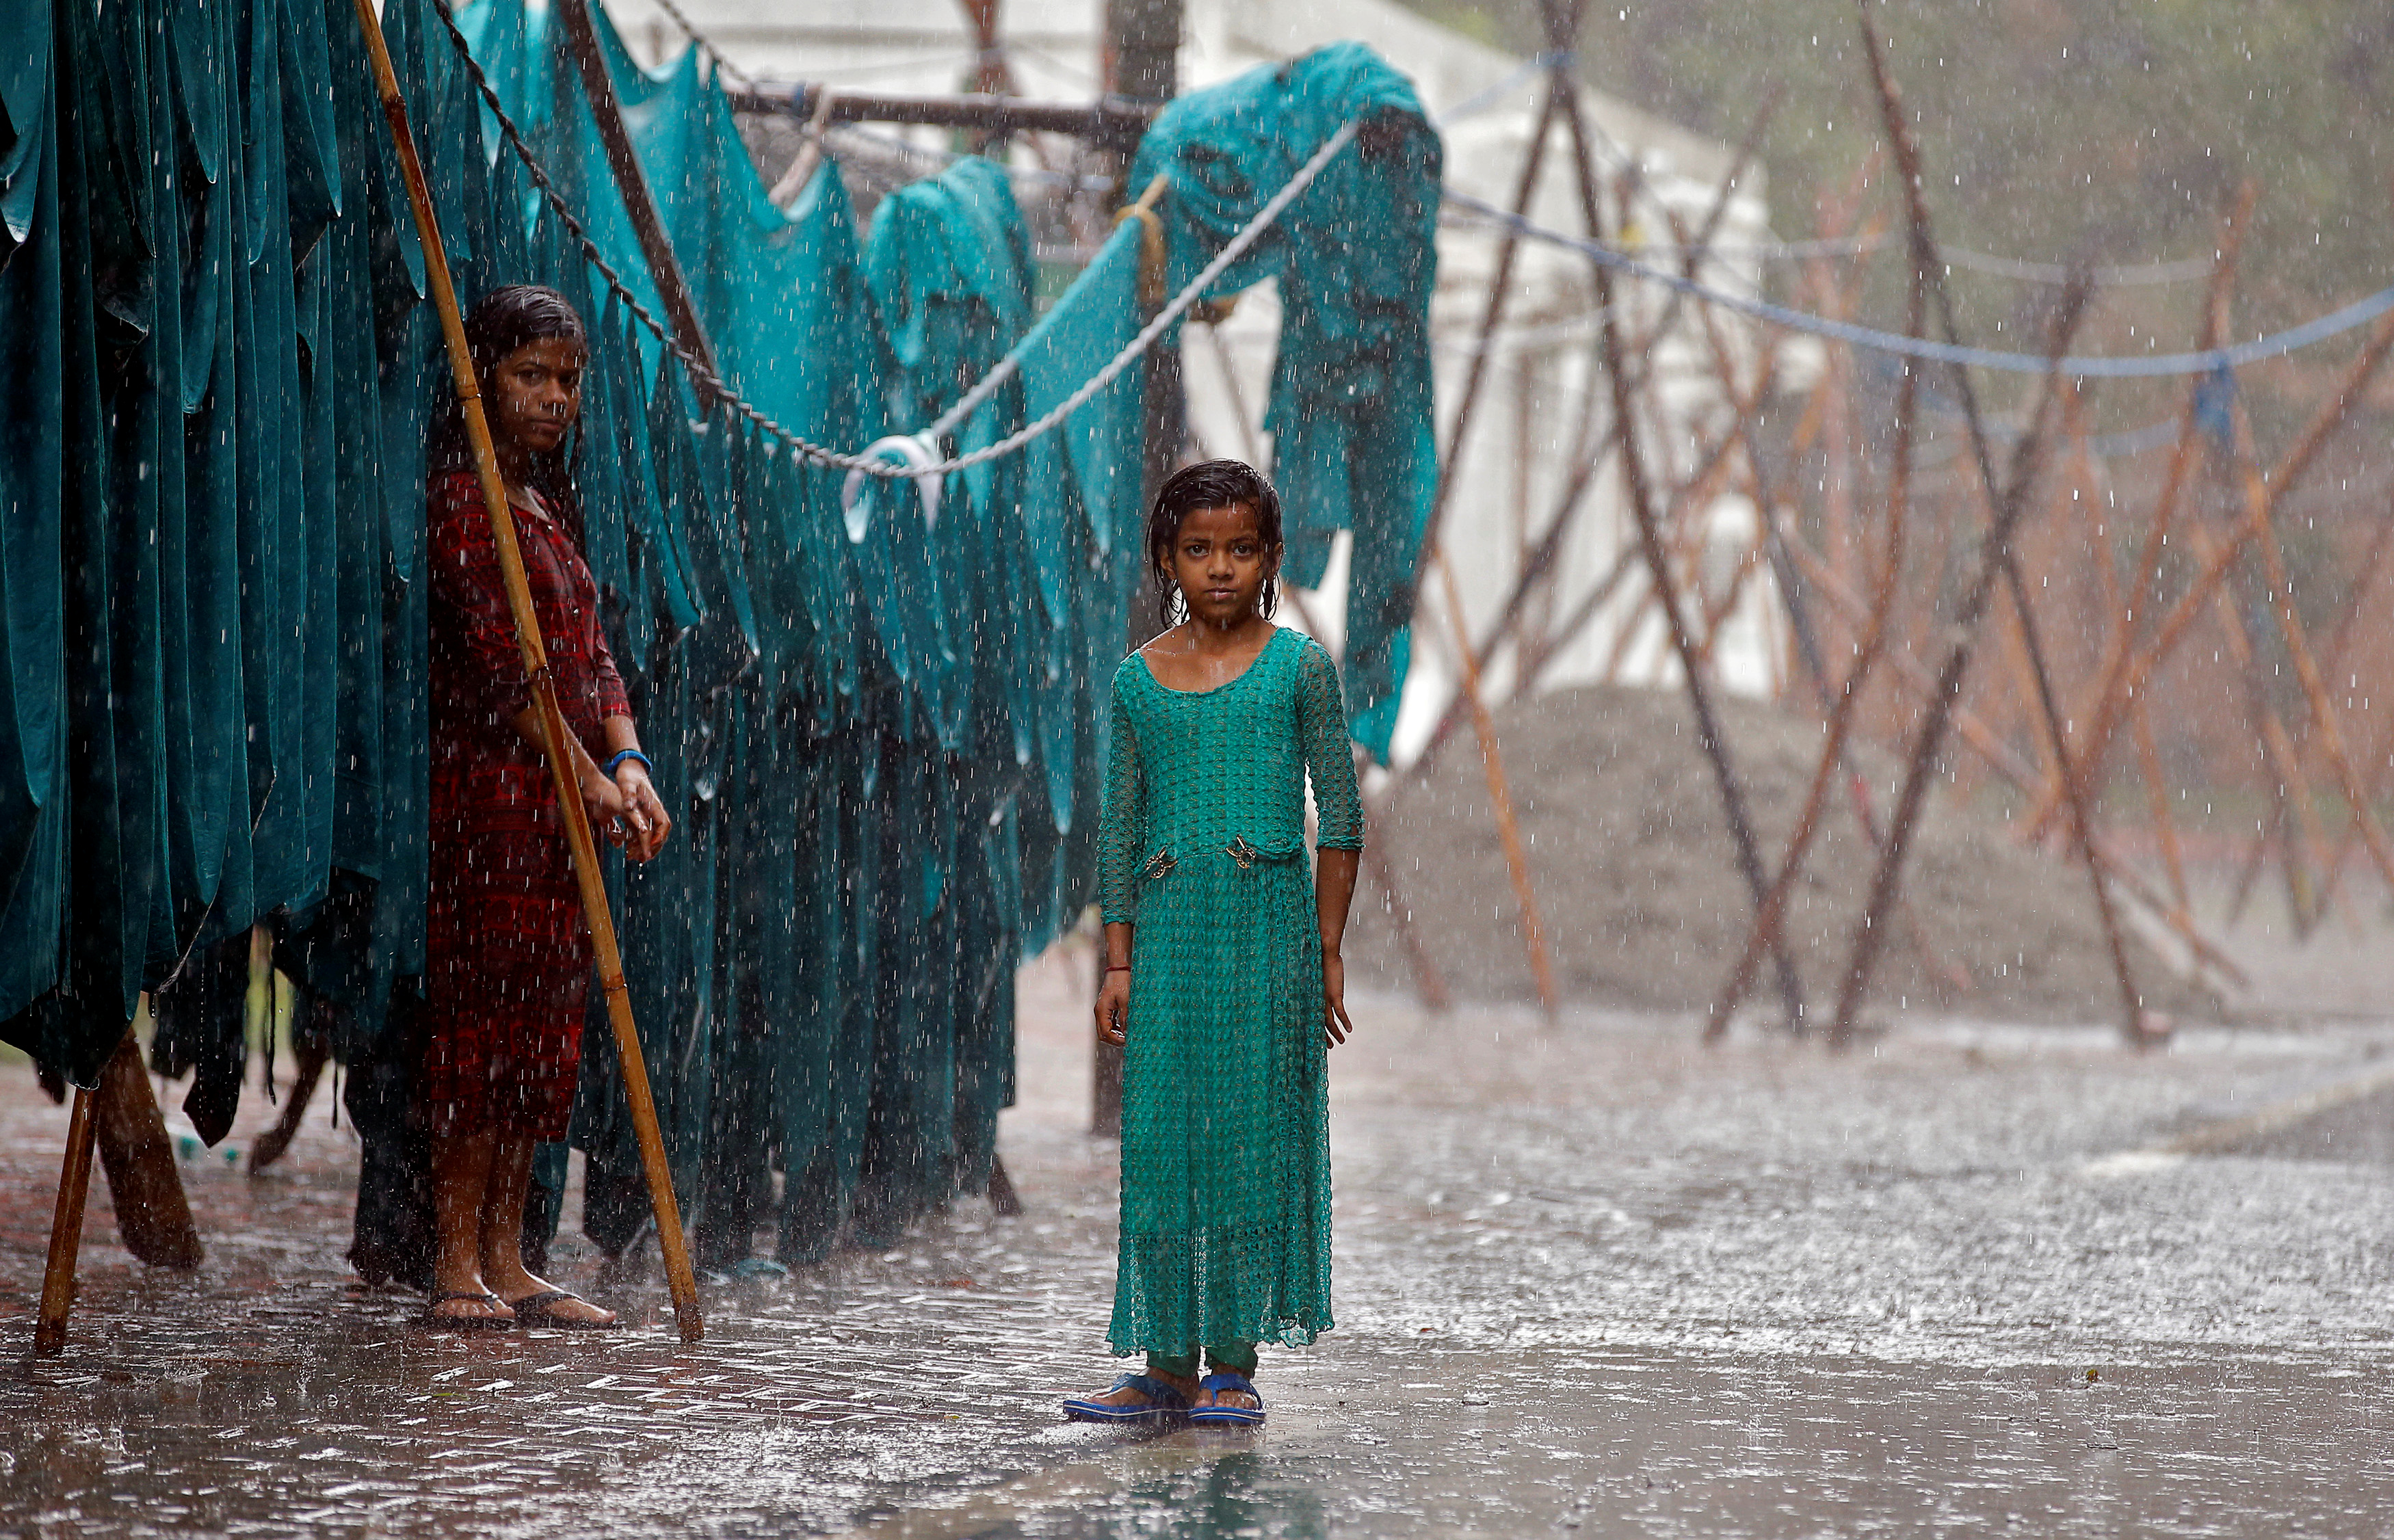 Girls stand in monsoon rains beside an open laundry in New Delhi, India.